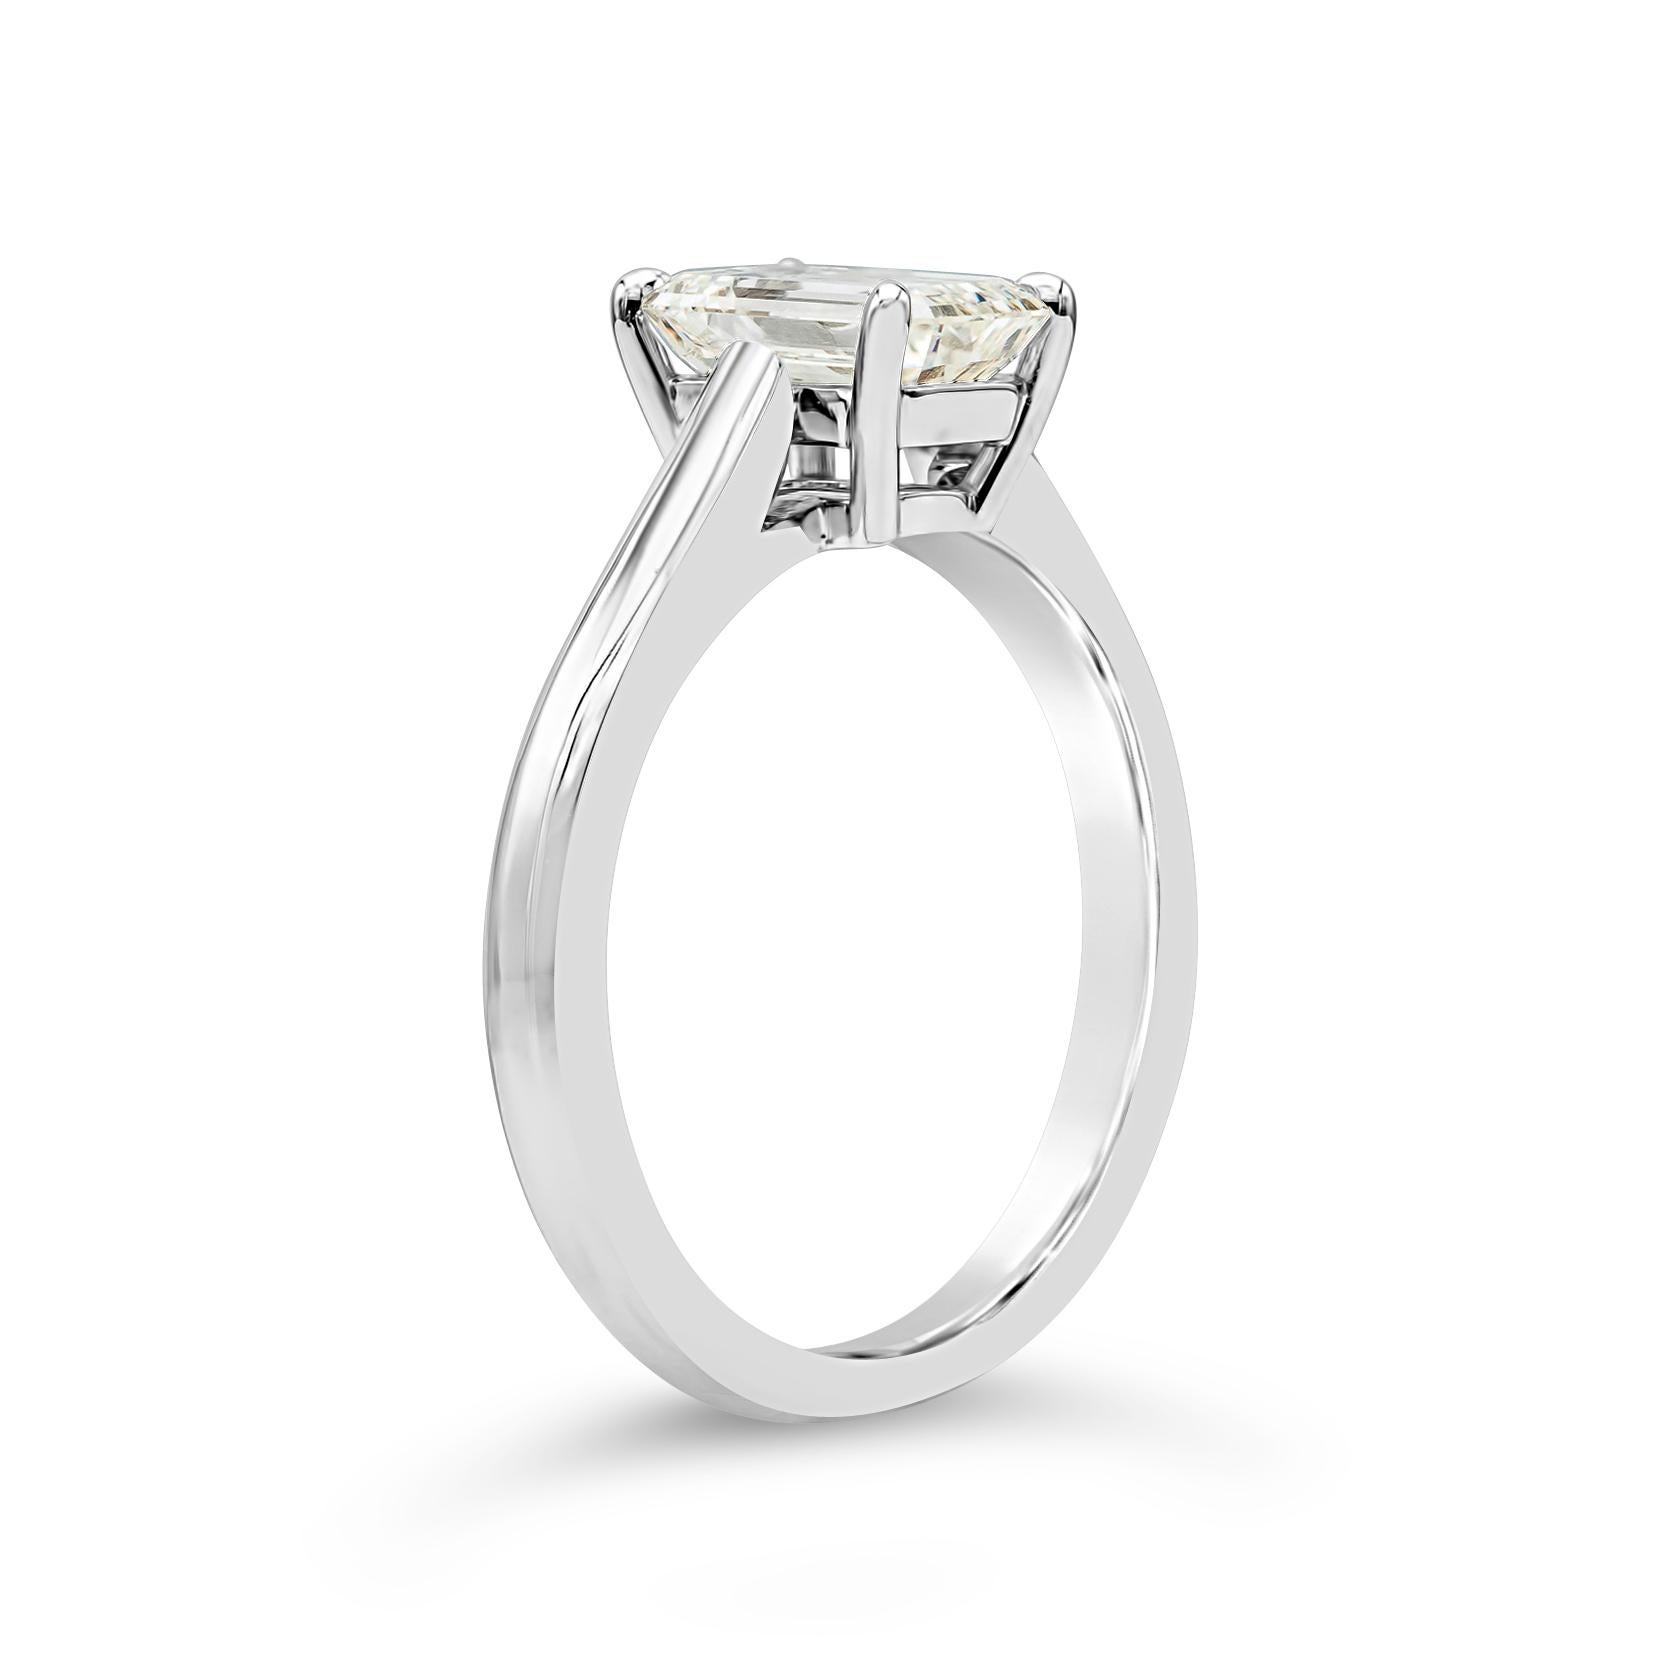 Contemporary GIA Certified 1.33 Carat Emerald Cut Diamond Solitaire Engagement Ring